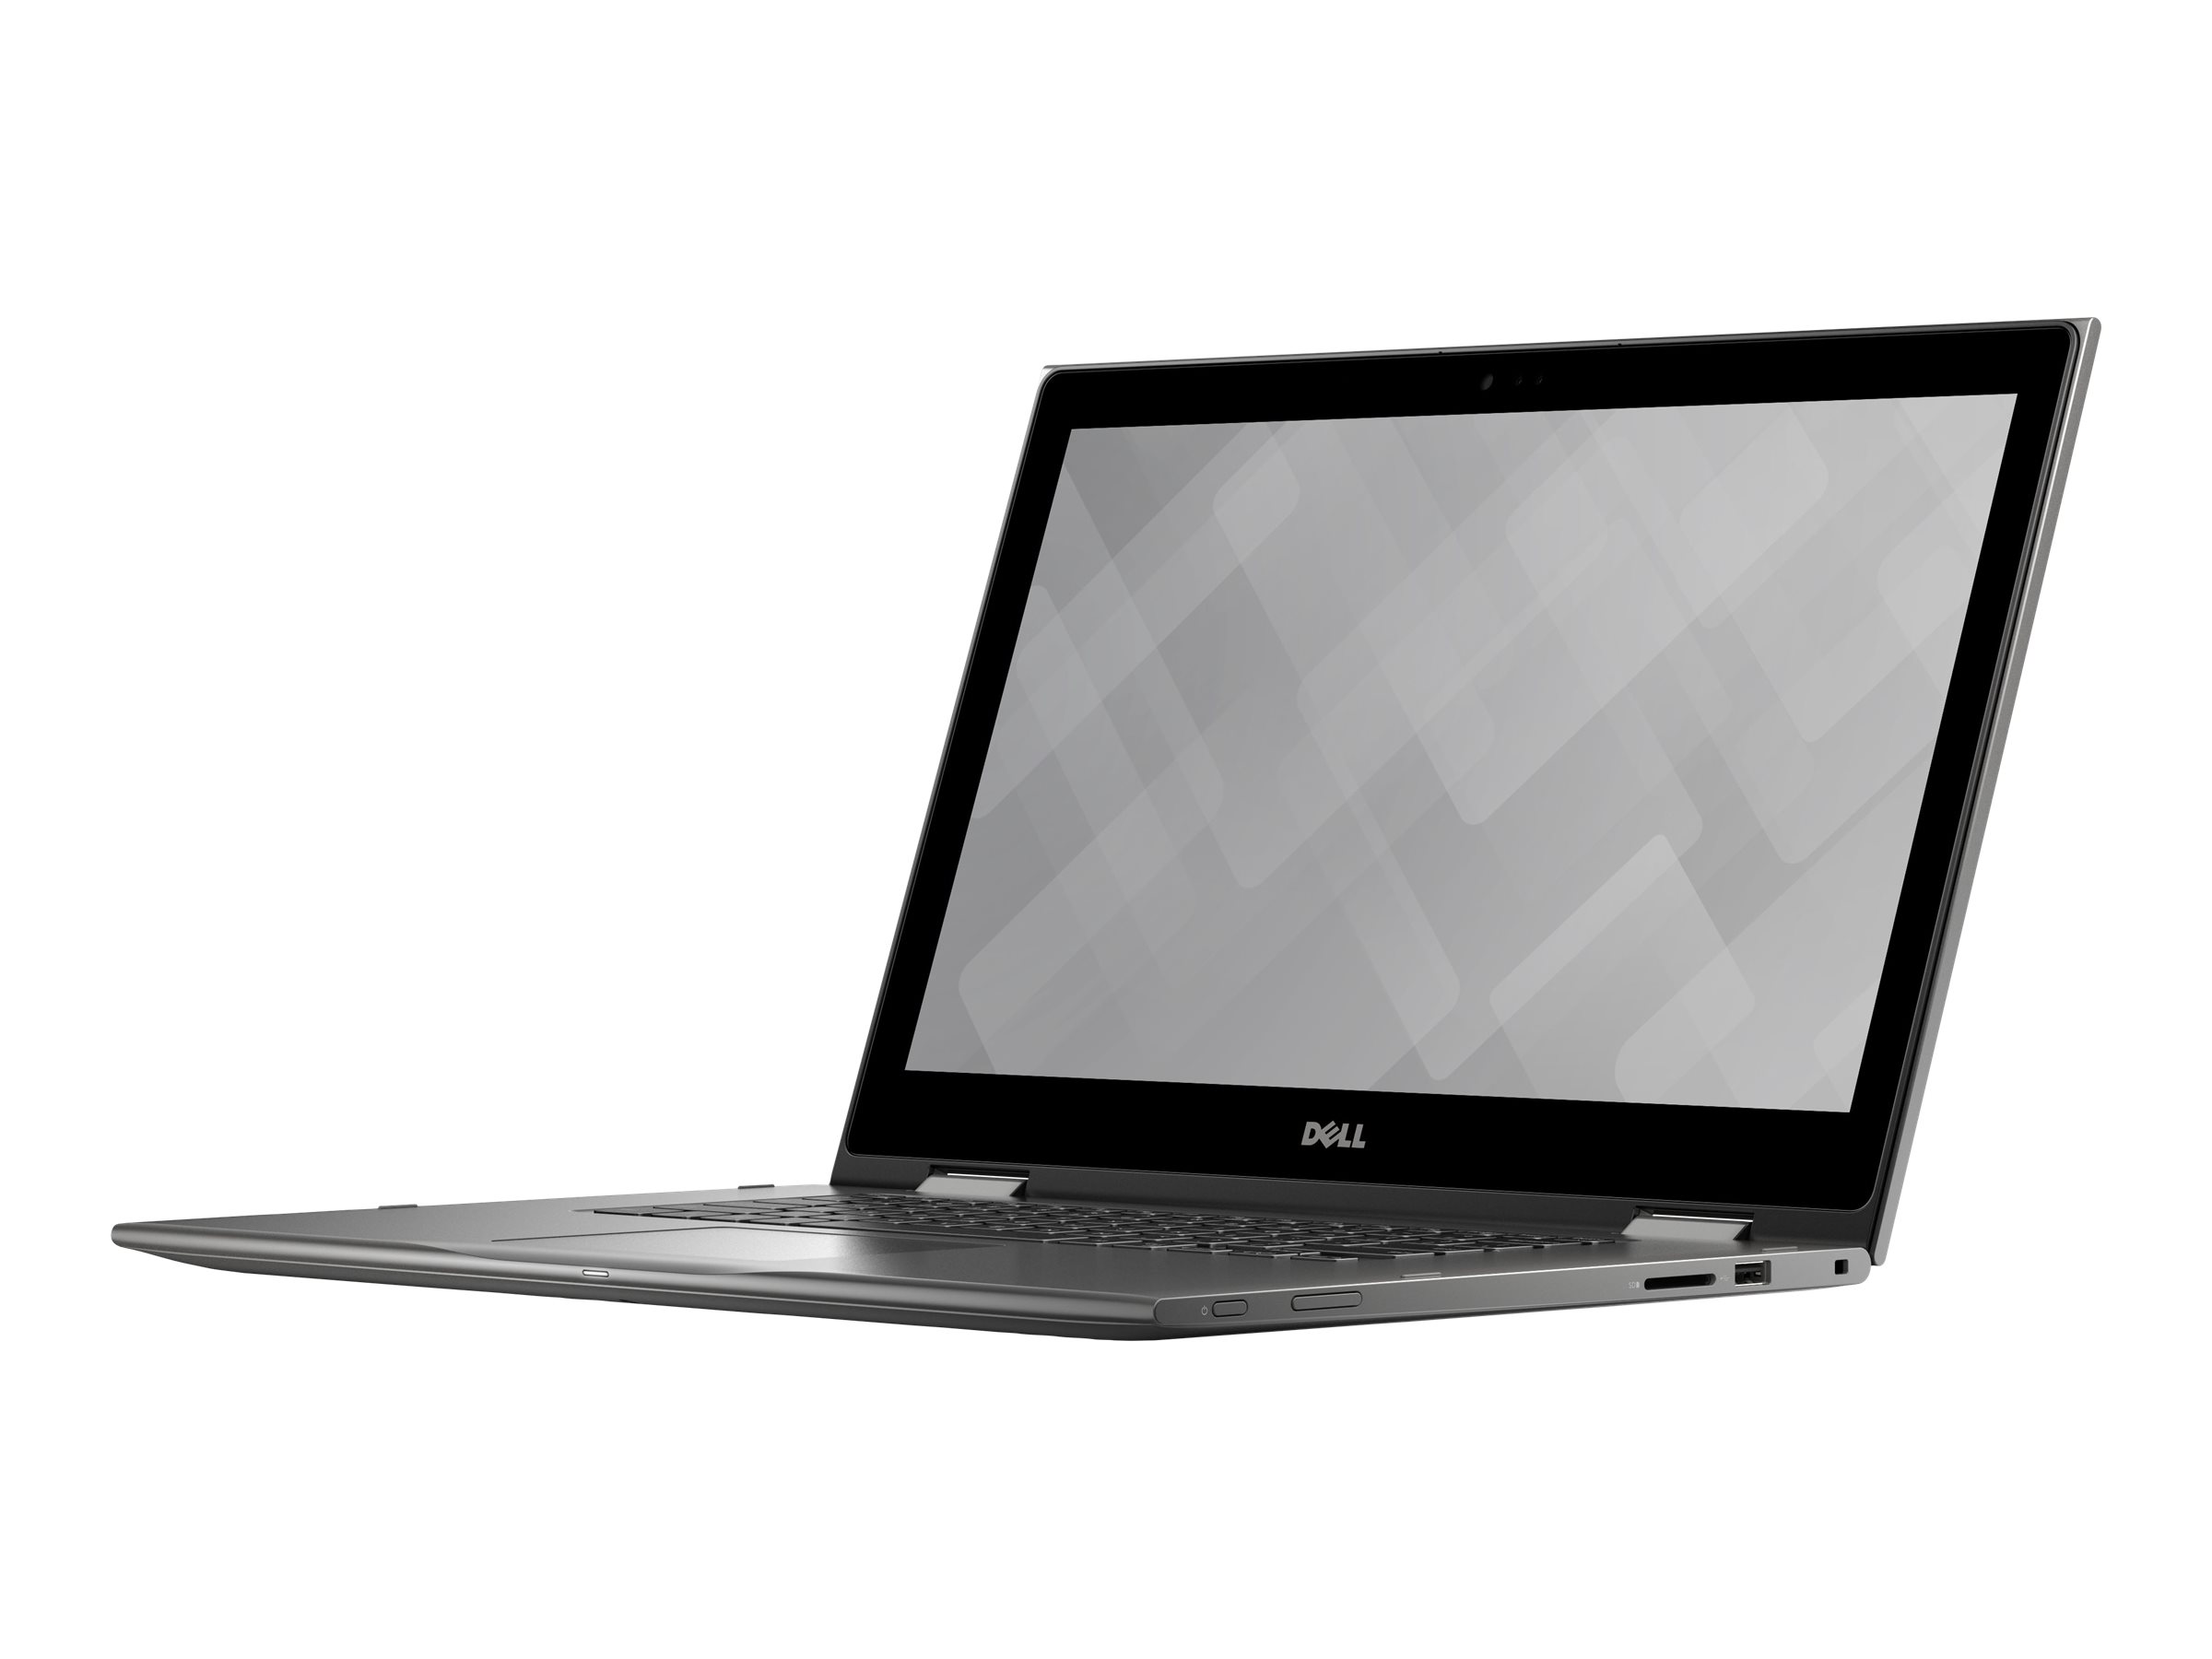 Inspiron 15 5000 5568 Notebook - image 1 of 12